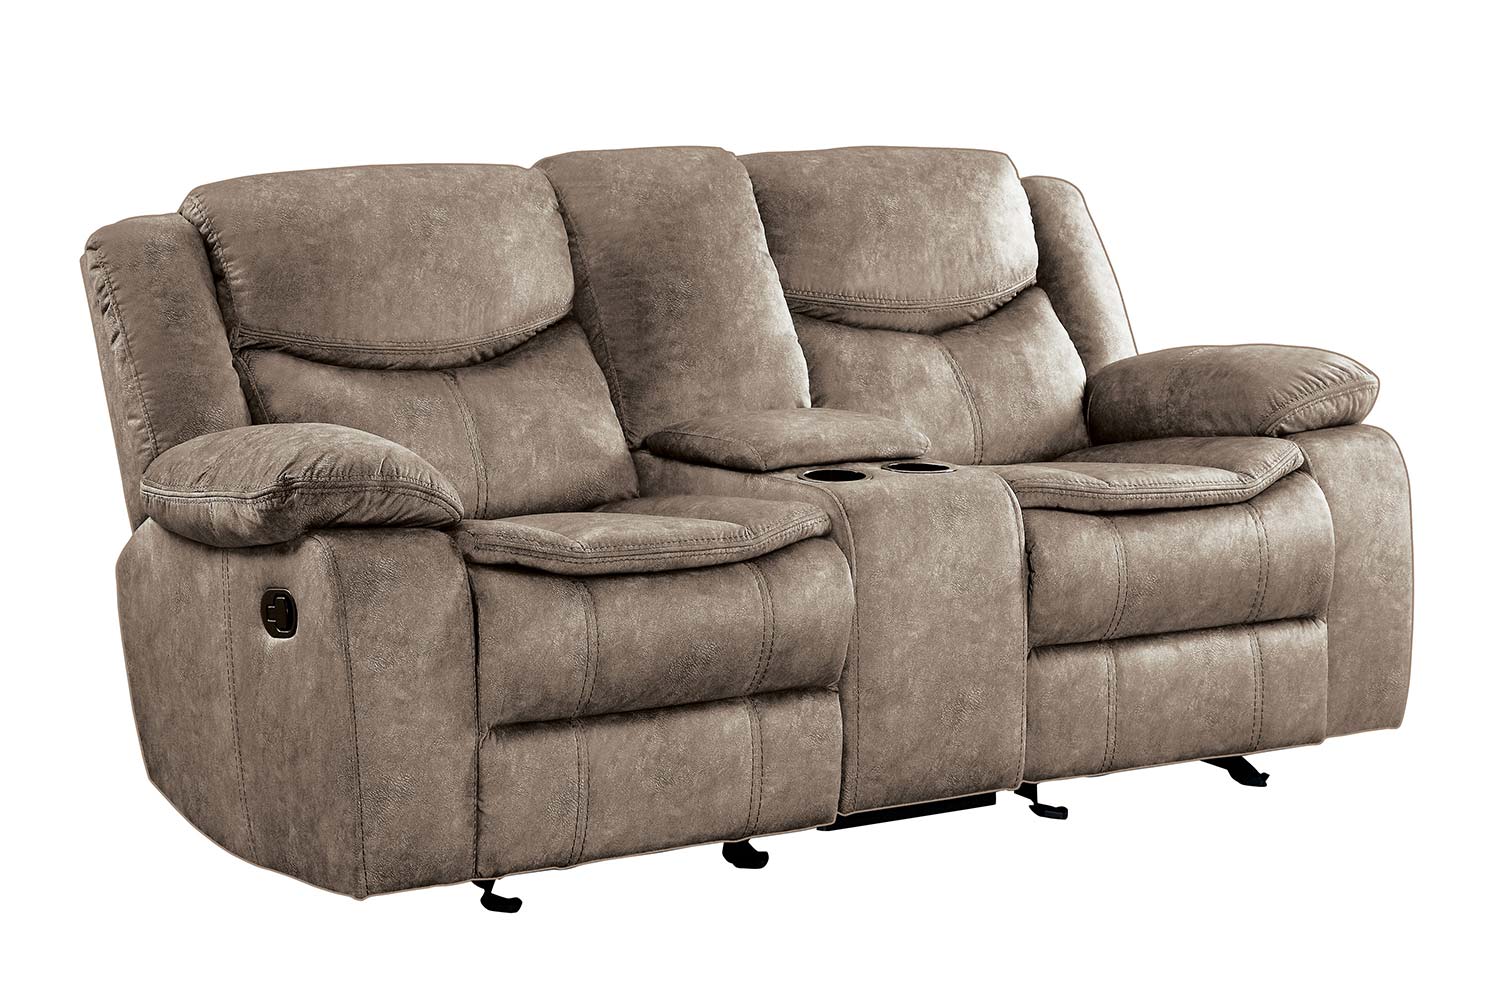 Homelegance Bastrop Double Glider Reclining Love Seat with Center Console - Brown